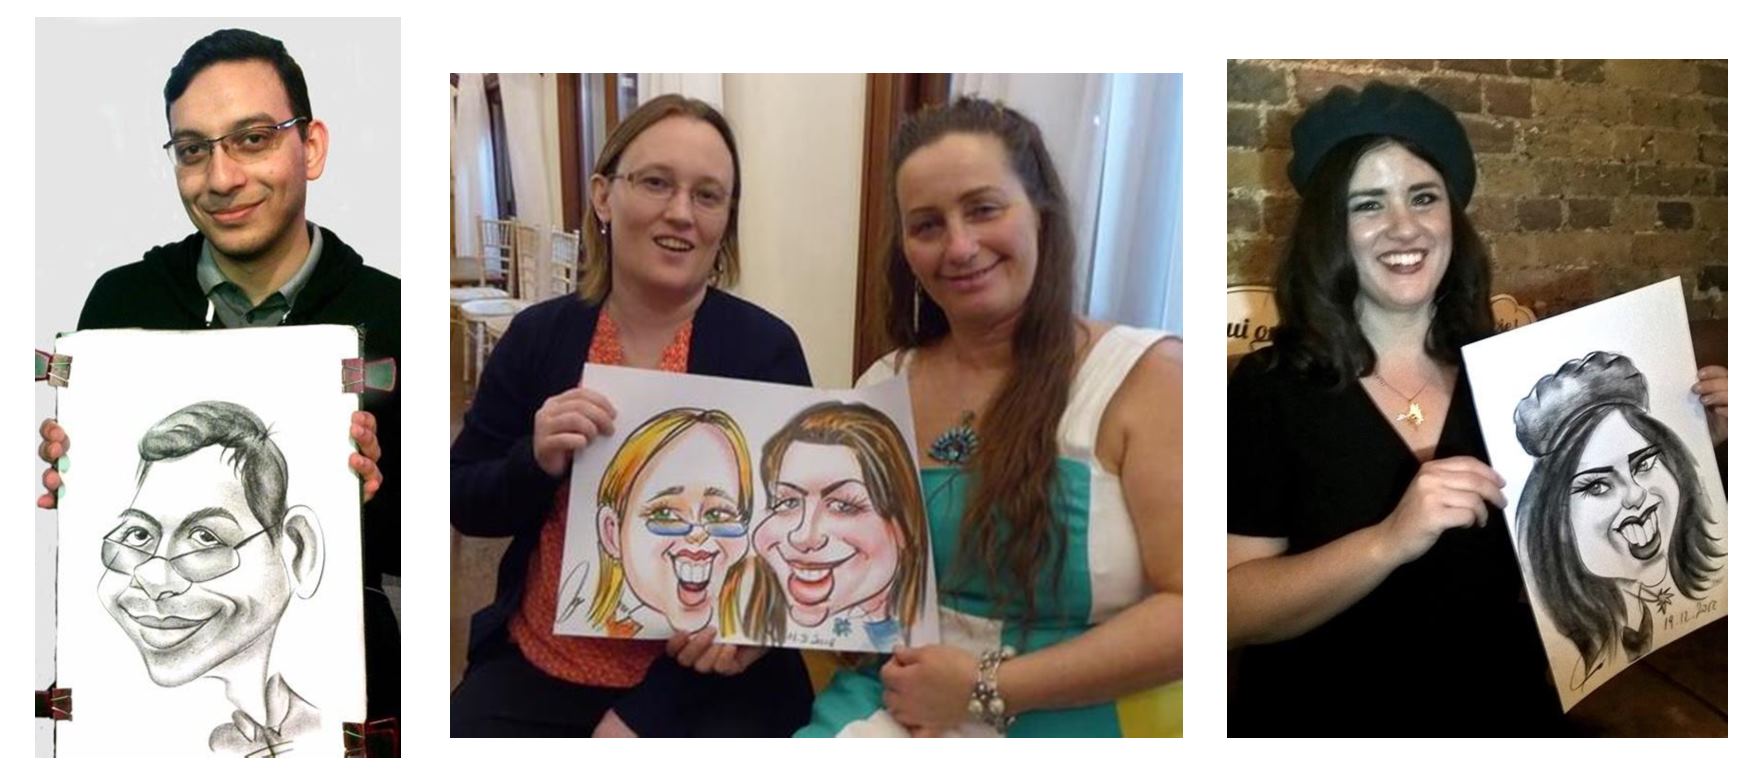 Hire Aberdeen and Dundee caricaturist